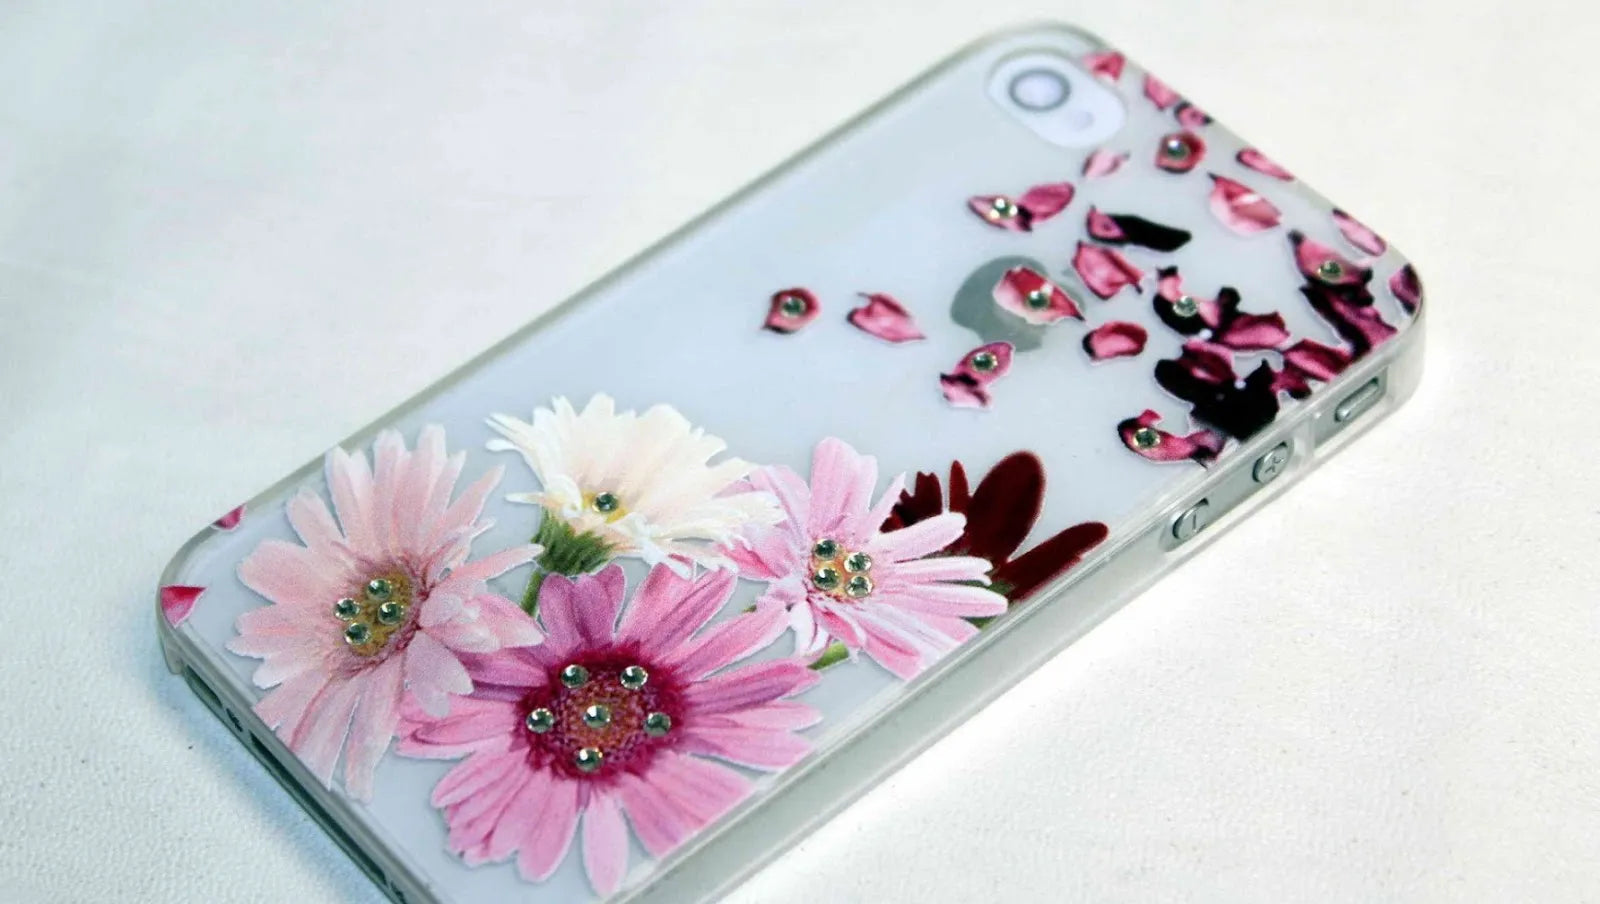 What to Do With Old Phone Case